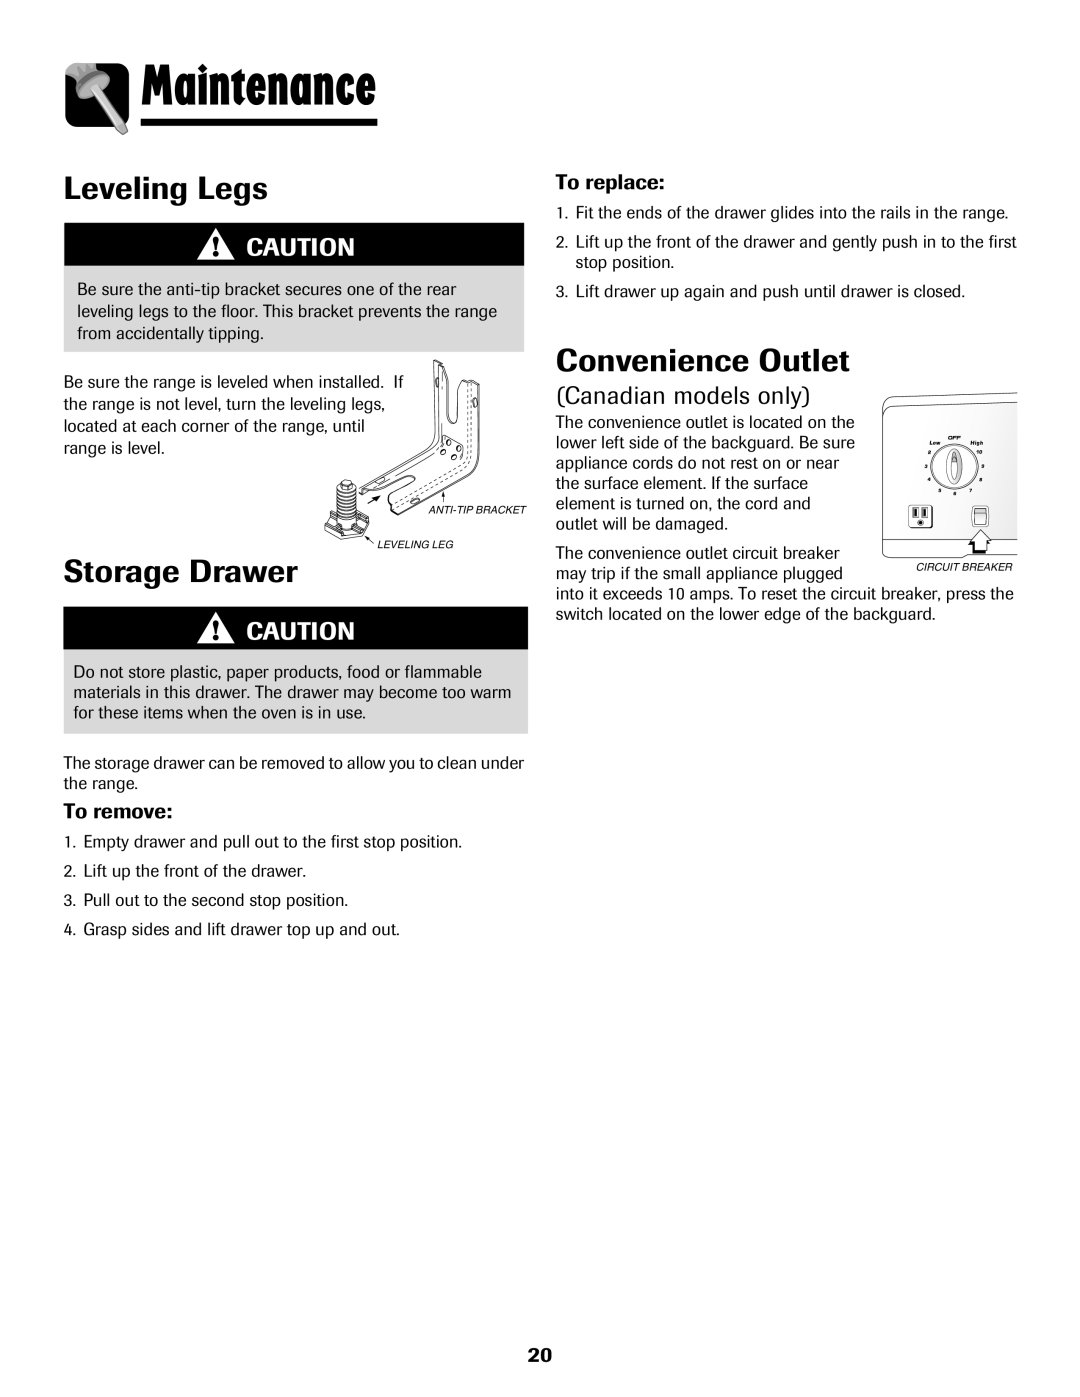 Amana Coil Leveling Legs, Storage Drawer, Convenience Outlet, Canadian models only, Maintenance, To remove, To replace 